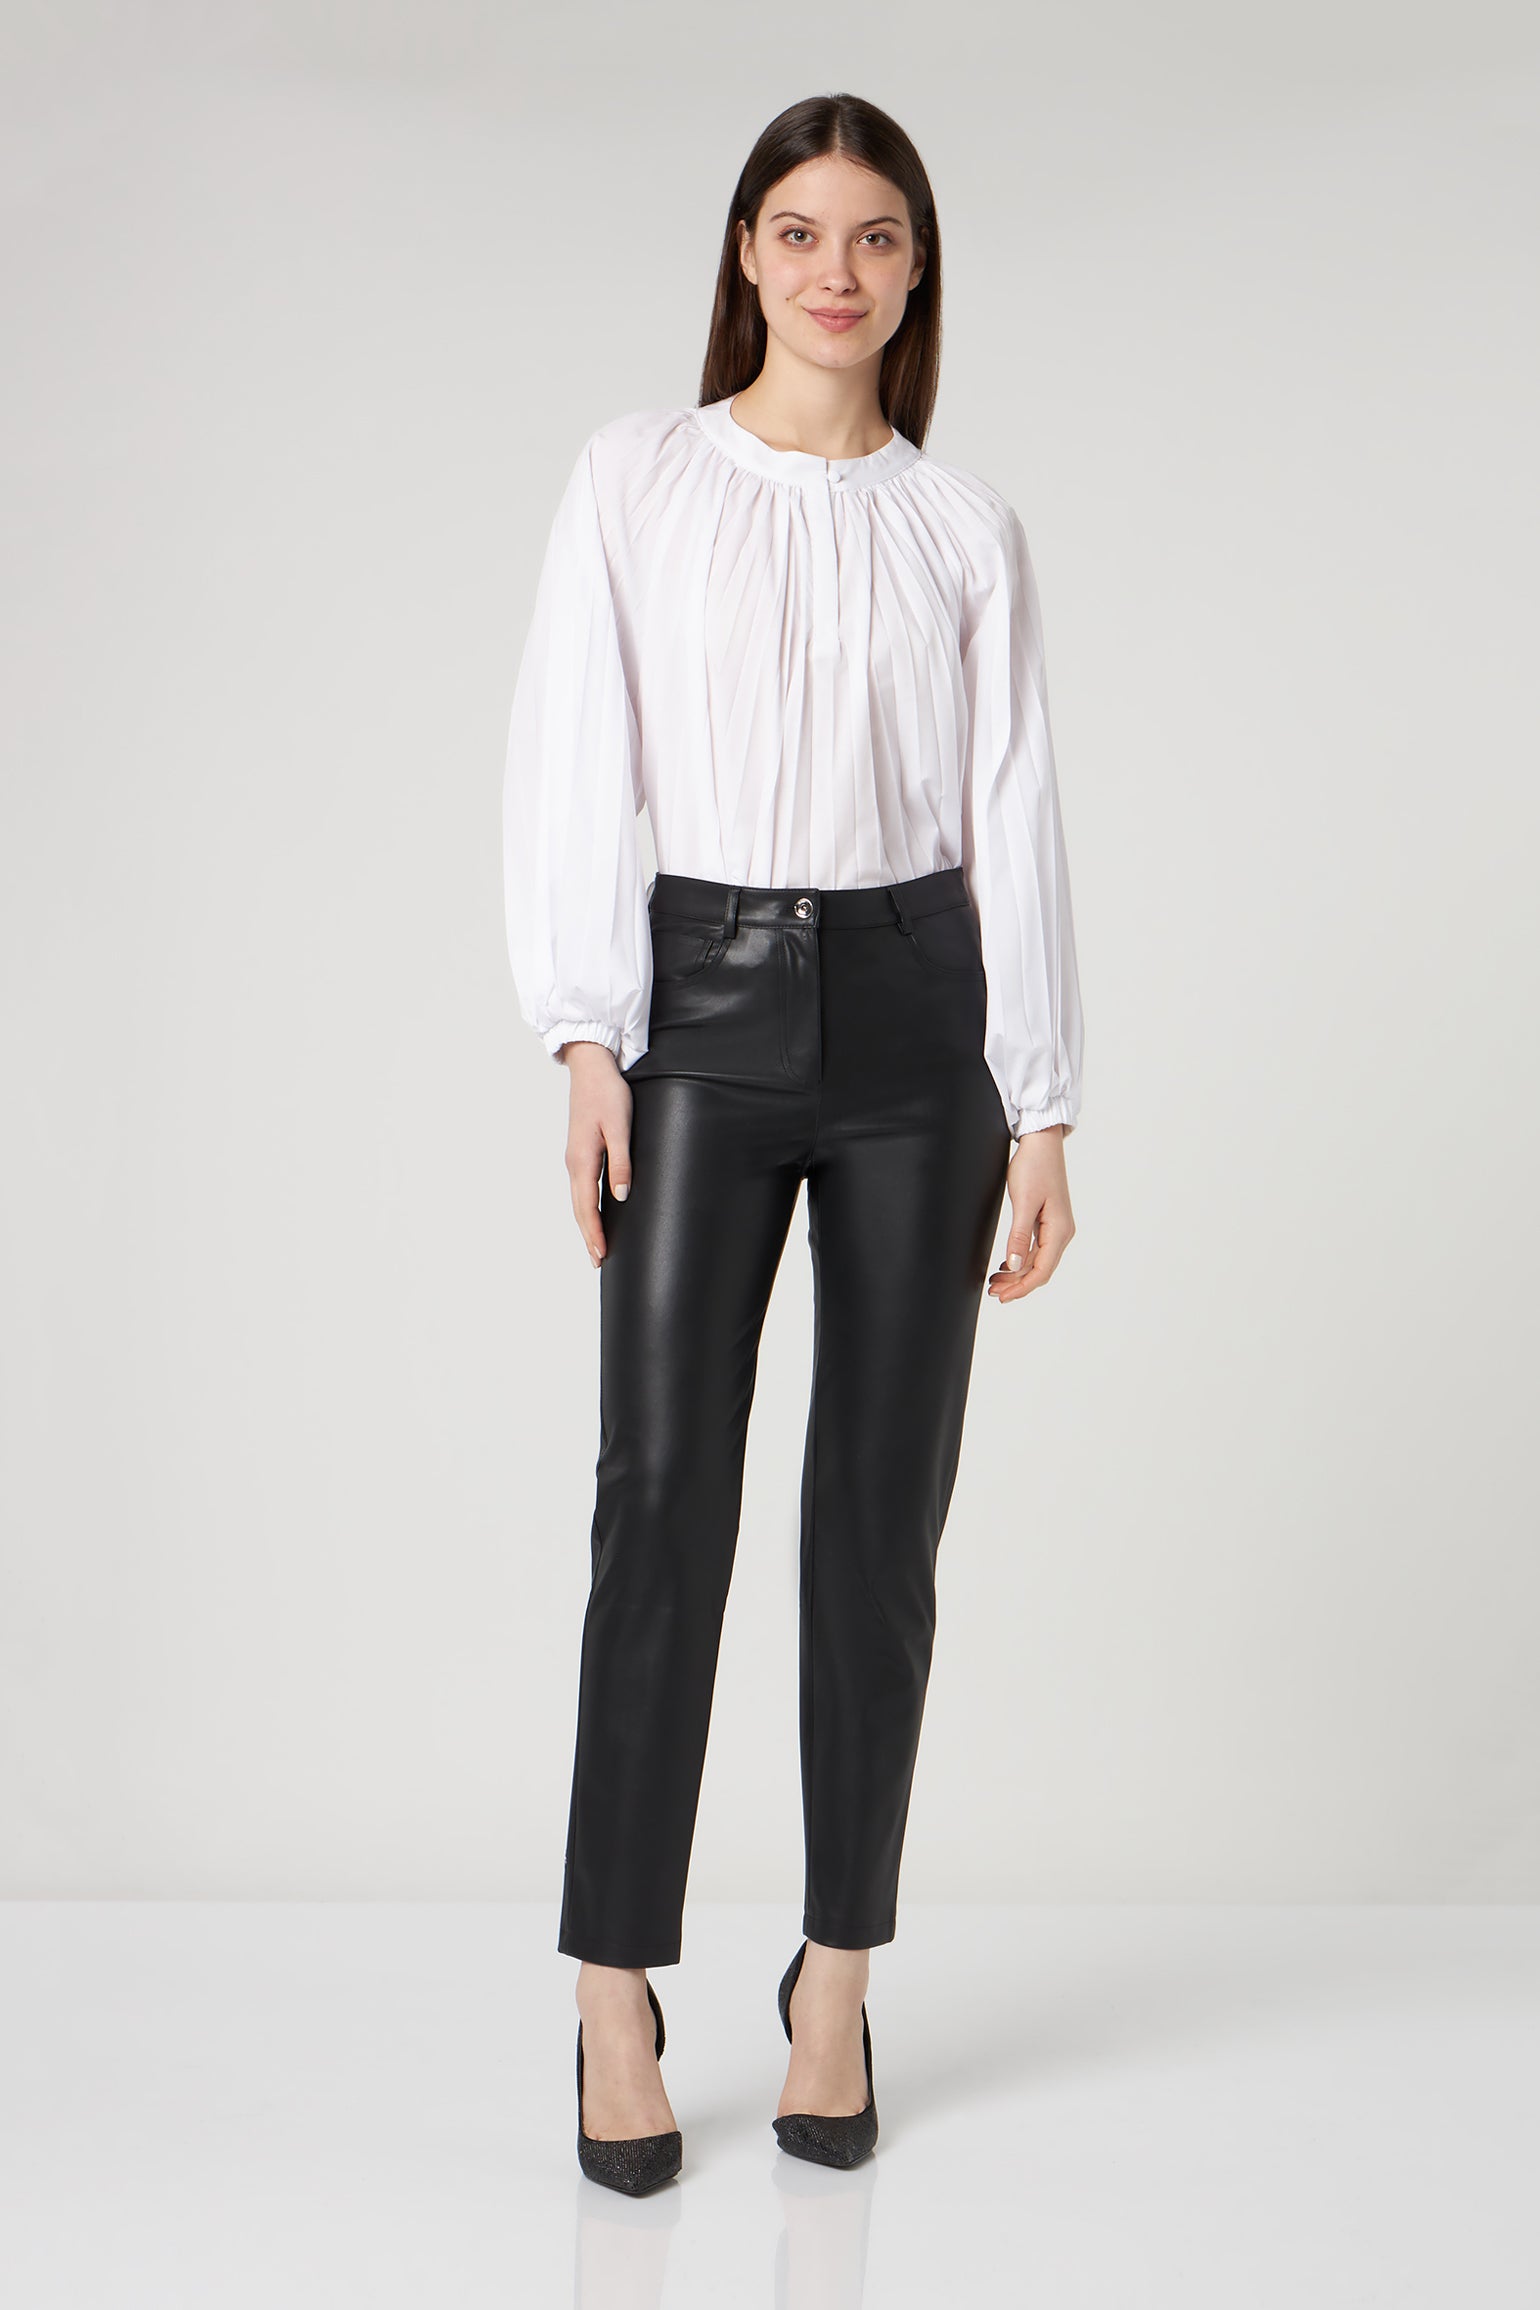 PATRIZIA PEPE Black Faux Leather Pants with Flowers